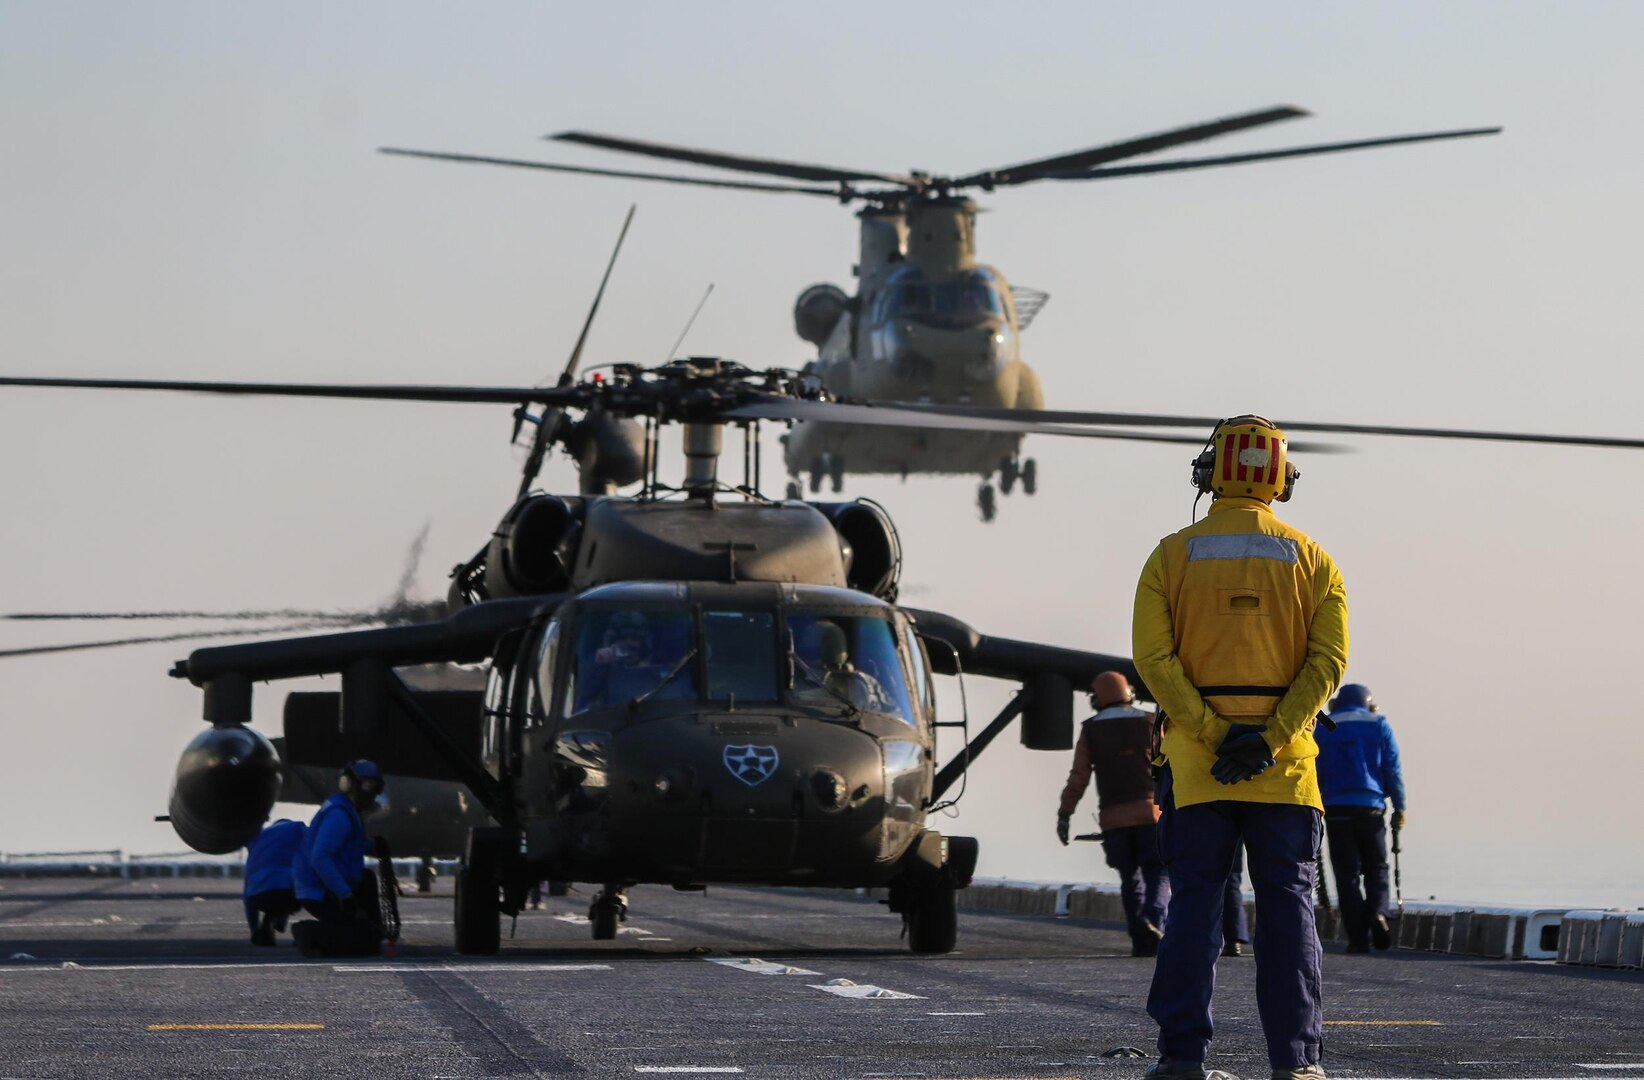 Aircrews from the 2nd Combat Aviation Brigade complete deck landing qualifications on the Republic of Korea Navy Ship Dokdo in the Yellow Sea last month. Here an ROK Navy air controller (right) watches a CH-47 Chinook from 3rd Battalion 2nd General Support Aviation Battalion approach the deck to land while ROK crews move to place chock blocks on two 2-2 AHB "Wildcard" Battalion Blackhawks. 